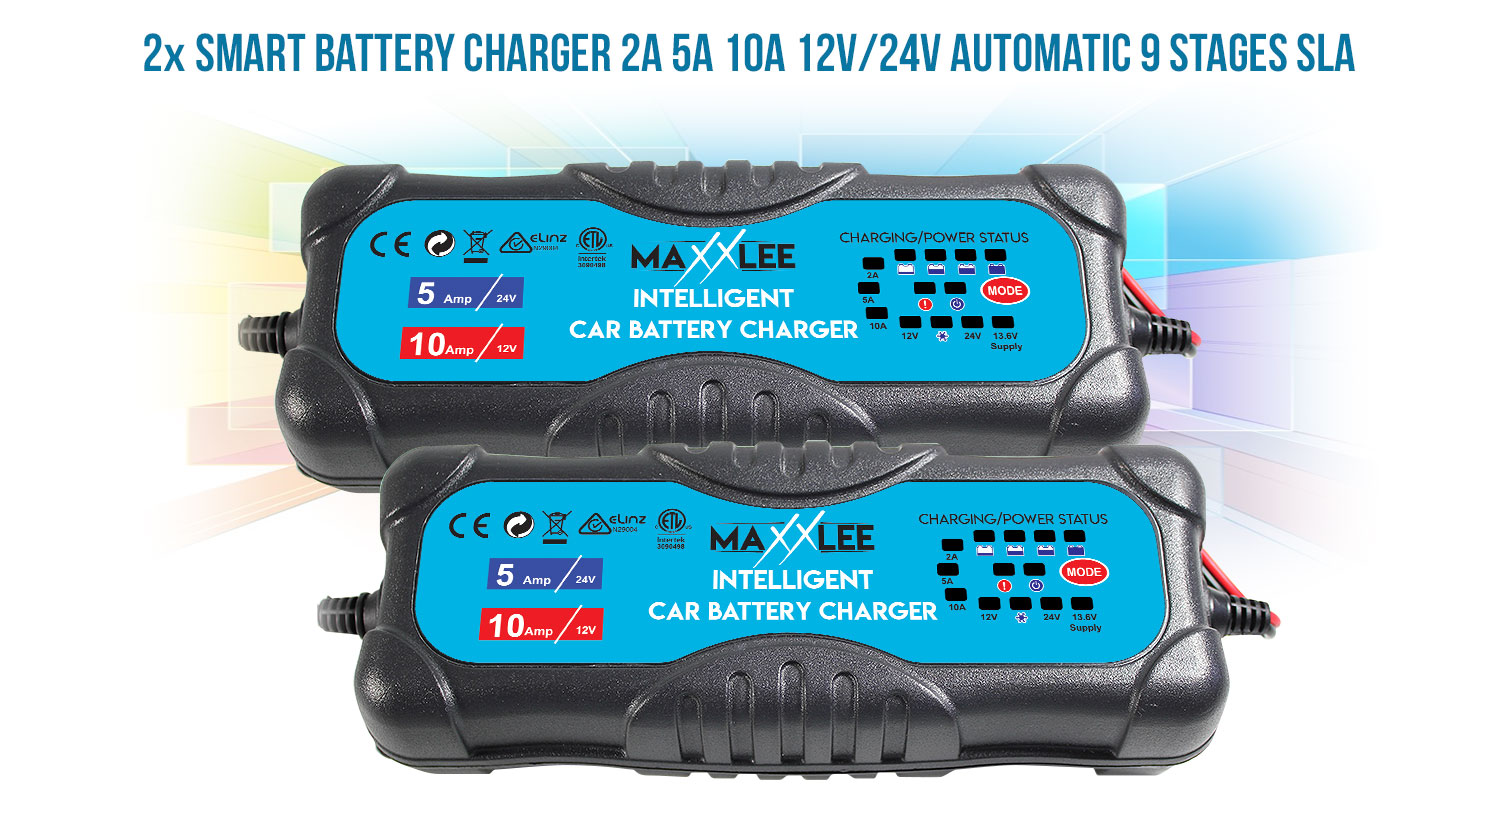 maxxlee smart battery chargers 